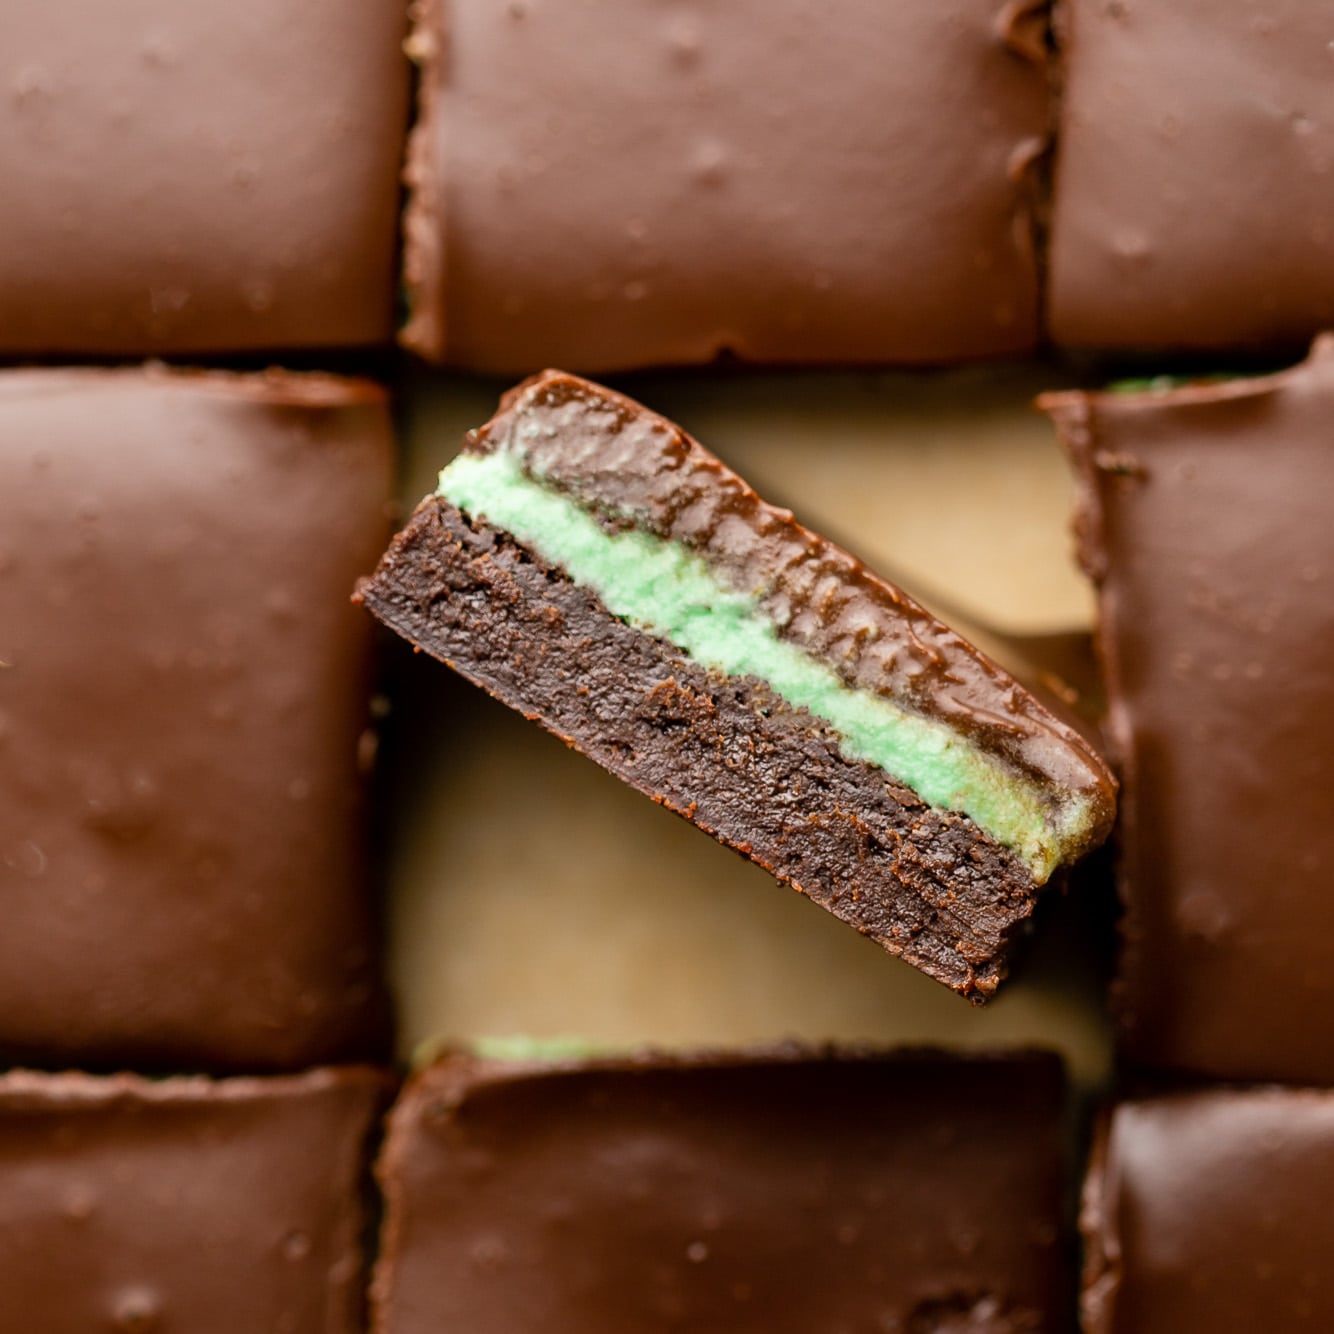 Mint and Chocolate